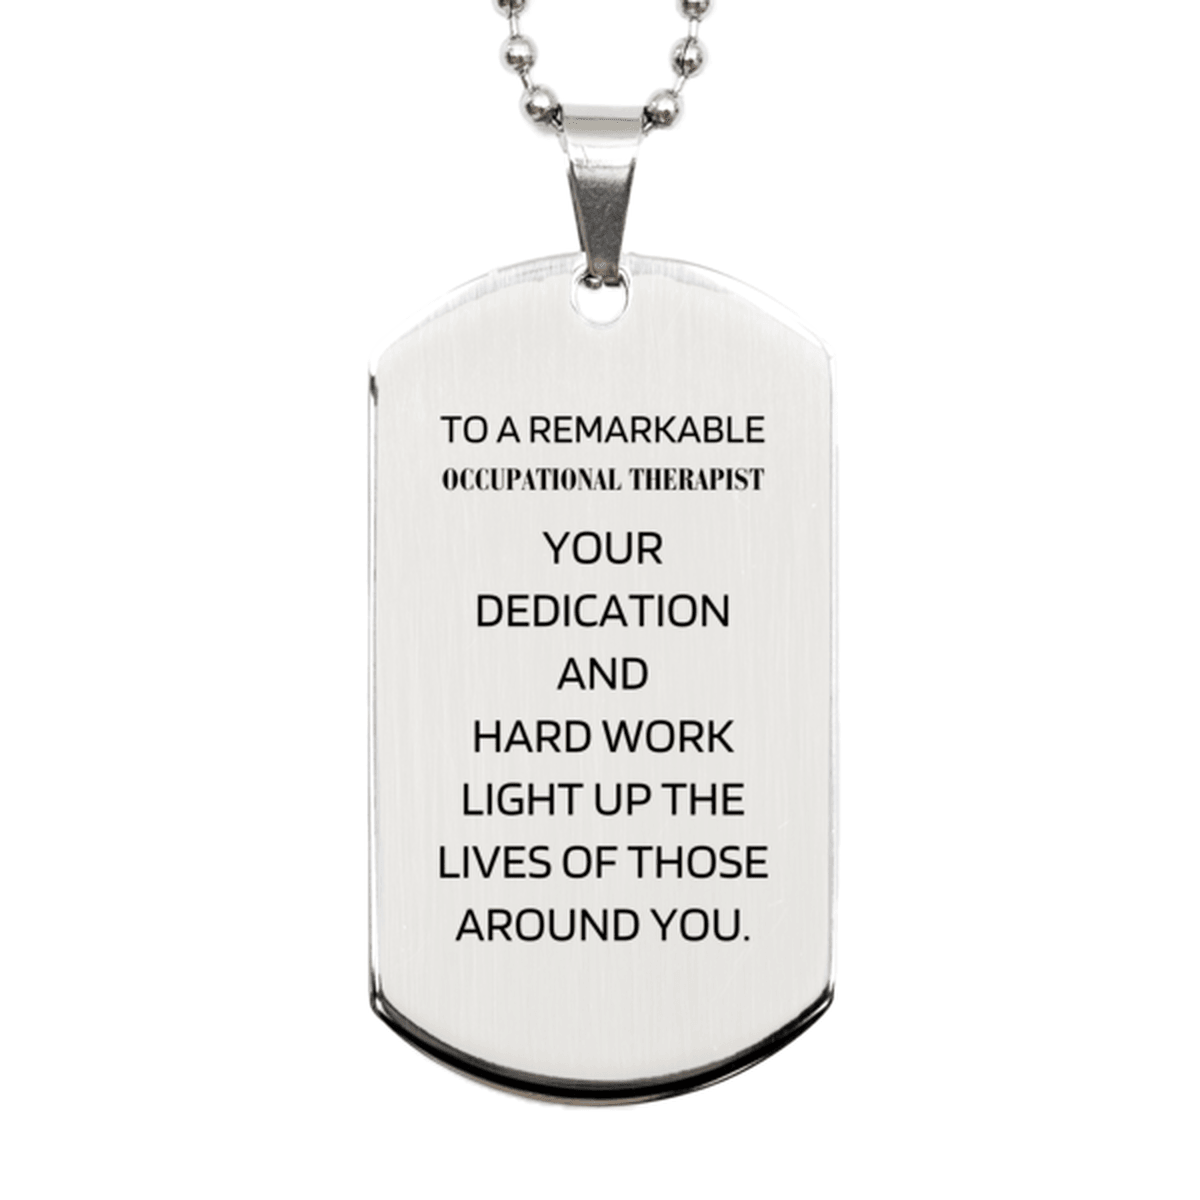 Remarkable Occupational Therapist Gifts, Your dedication and hard work, Inspirational Birthday Christmas Unique Silver Dog Tag For Occupational Therapist, Coworkers, Men, Women, Friends - Mallard Moon Gift Shop